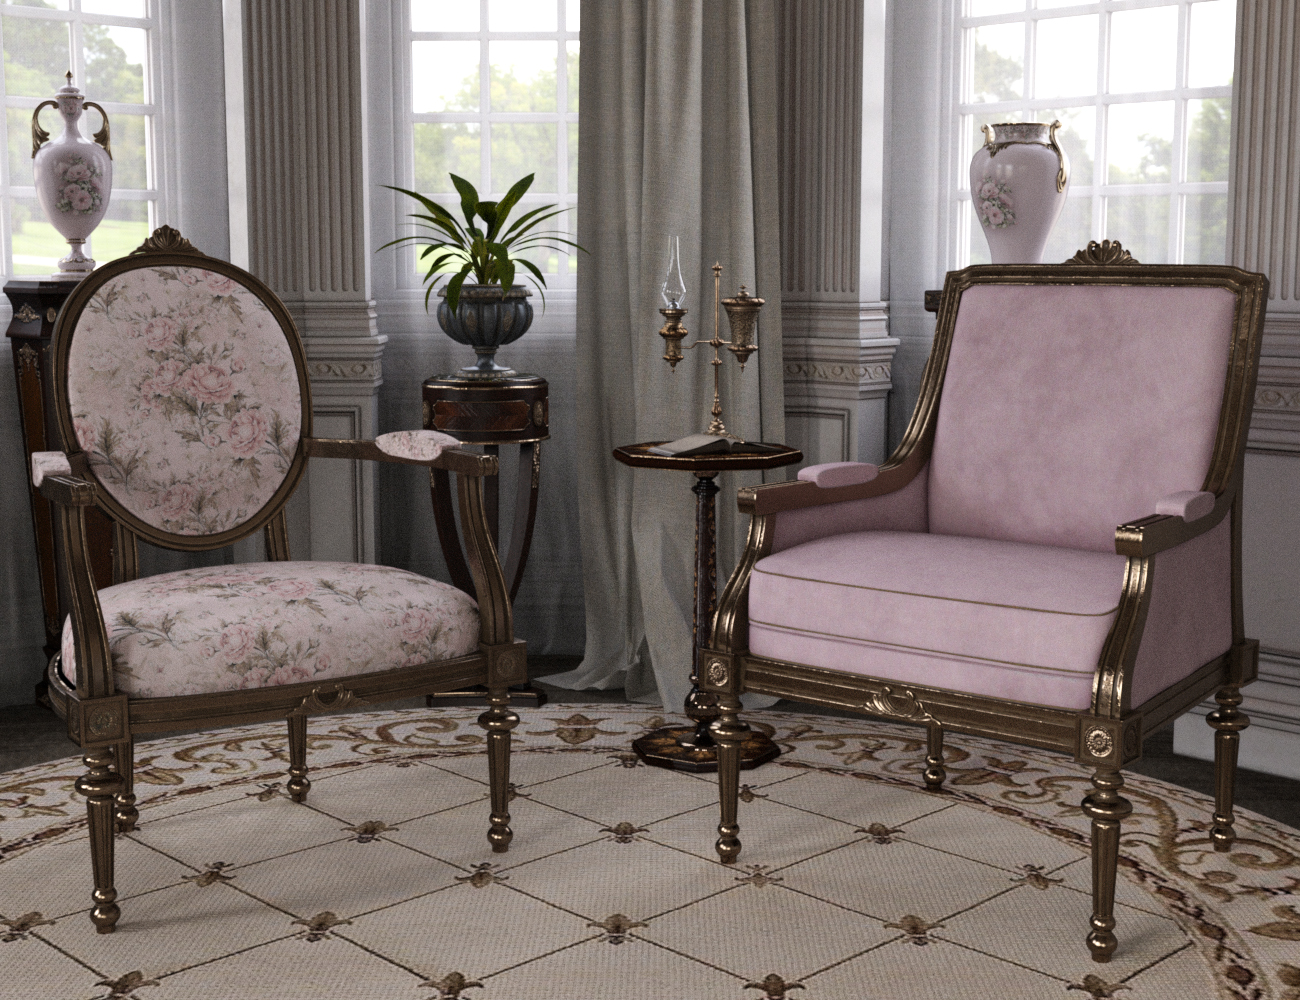 Reupholstered for Vintage Furniture Iray by: LaurieS, 3D Models by Daz 3D